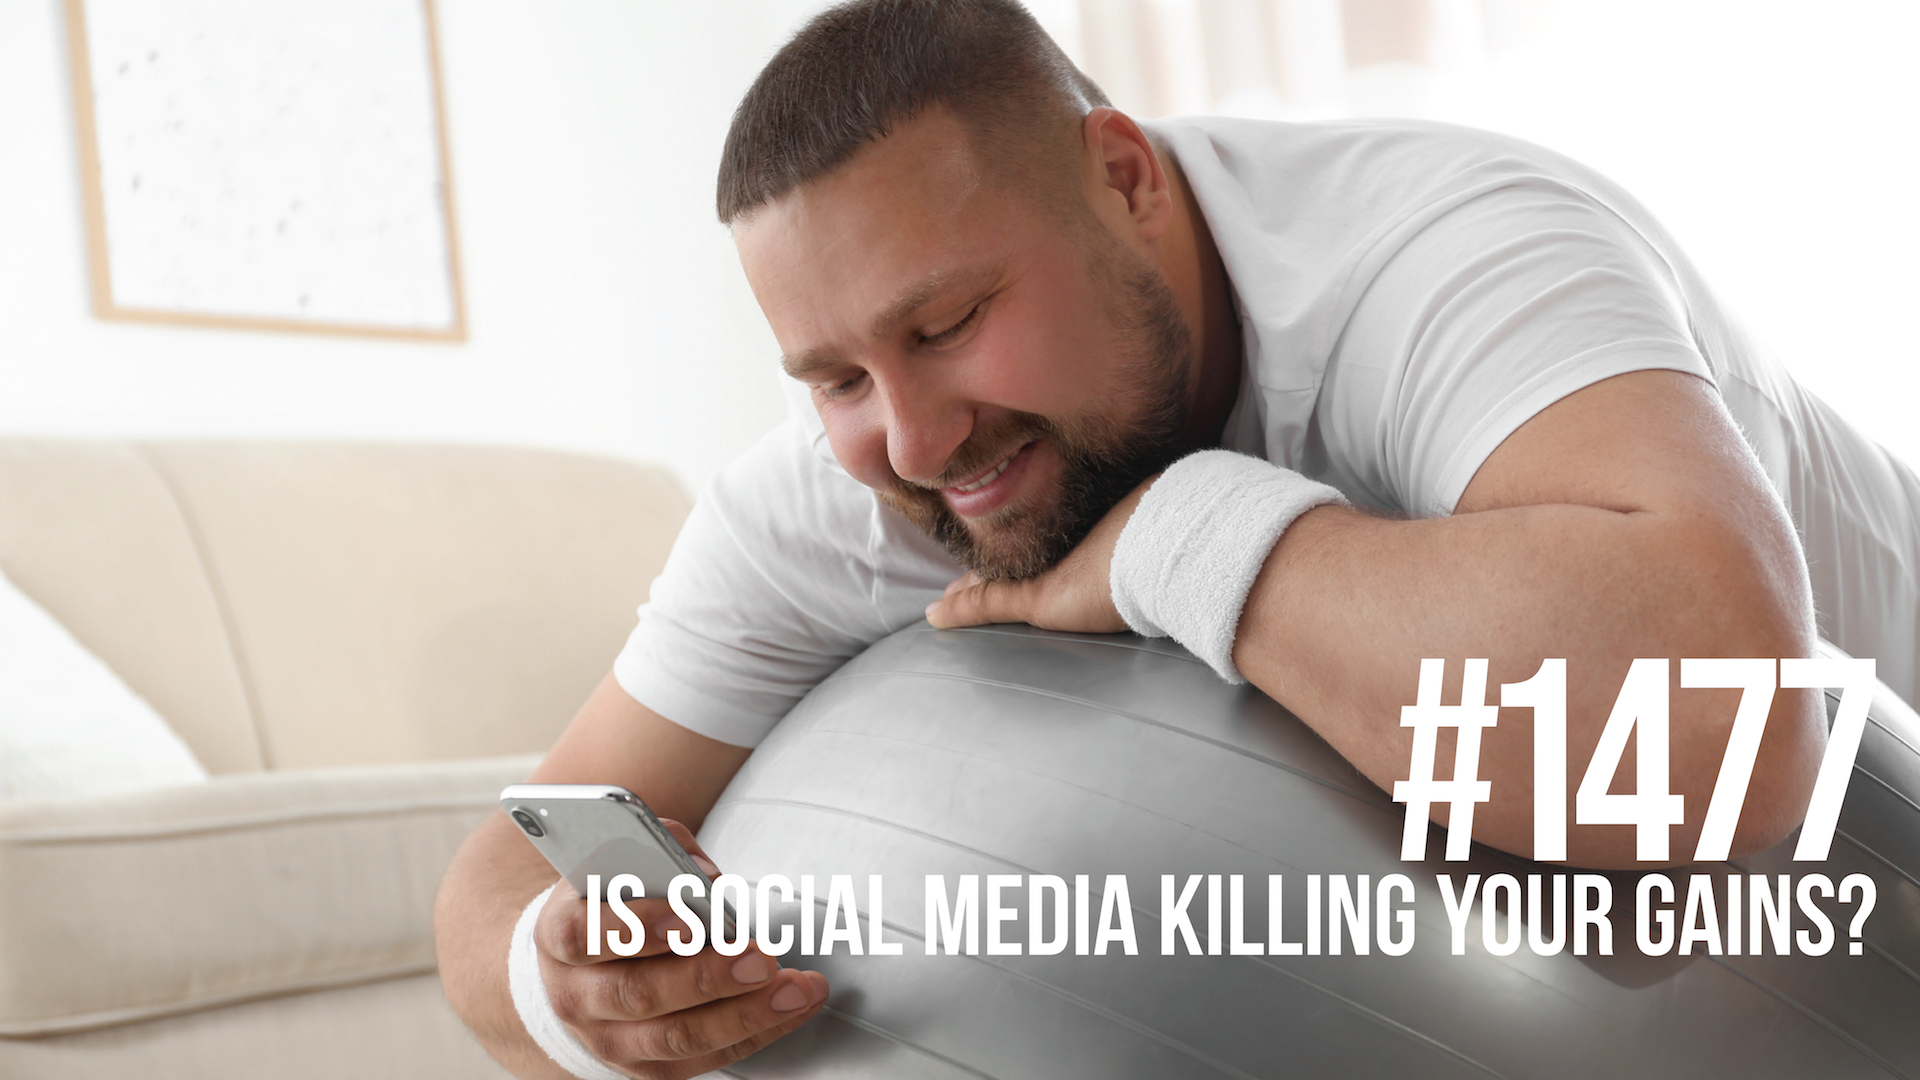 1477: Is Social Media Killing Your Gains?